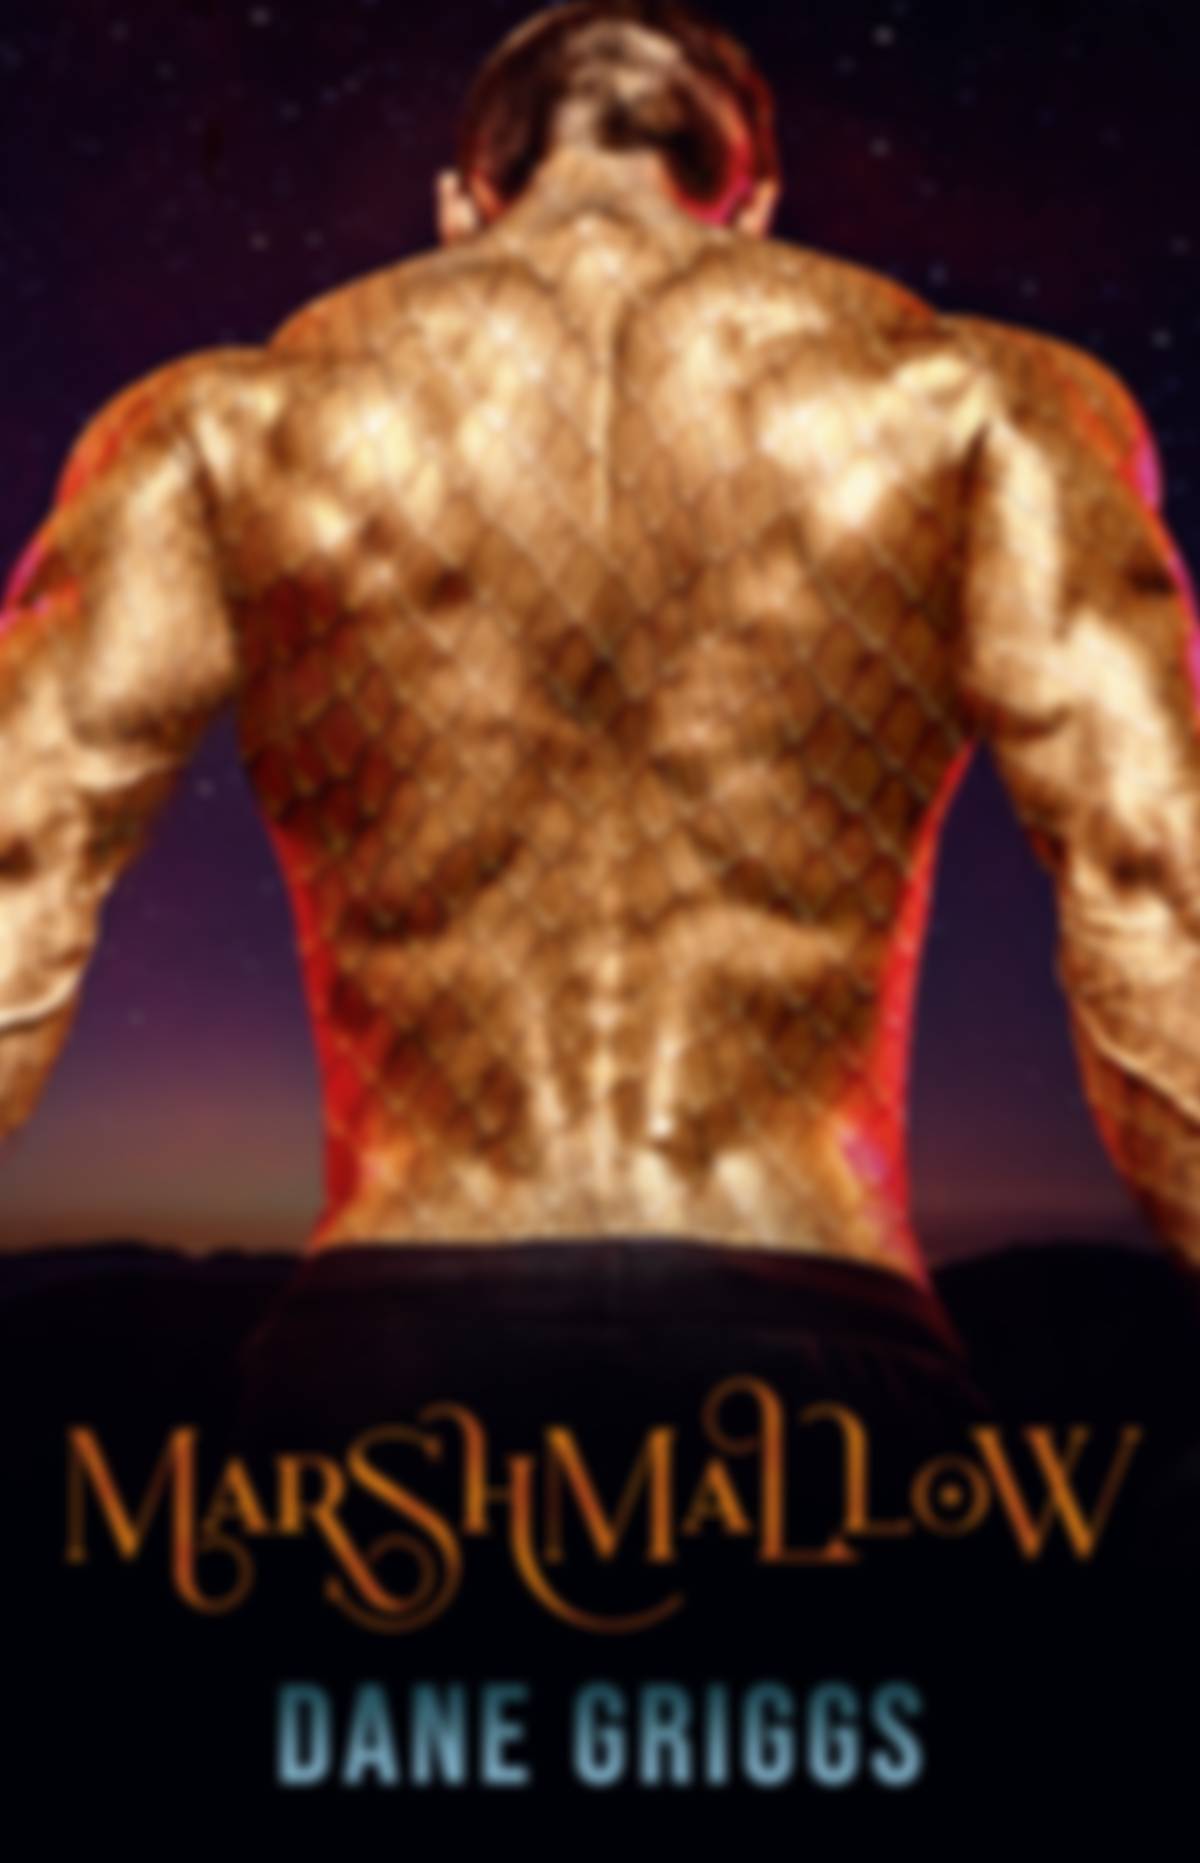 Book cover for Marshmallow by Dane Griggs. Featuring a muscular man's back